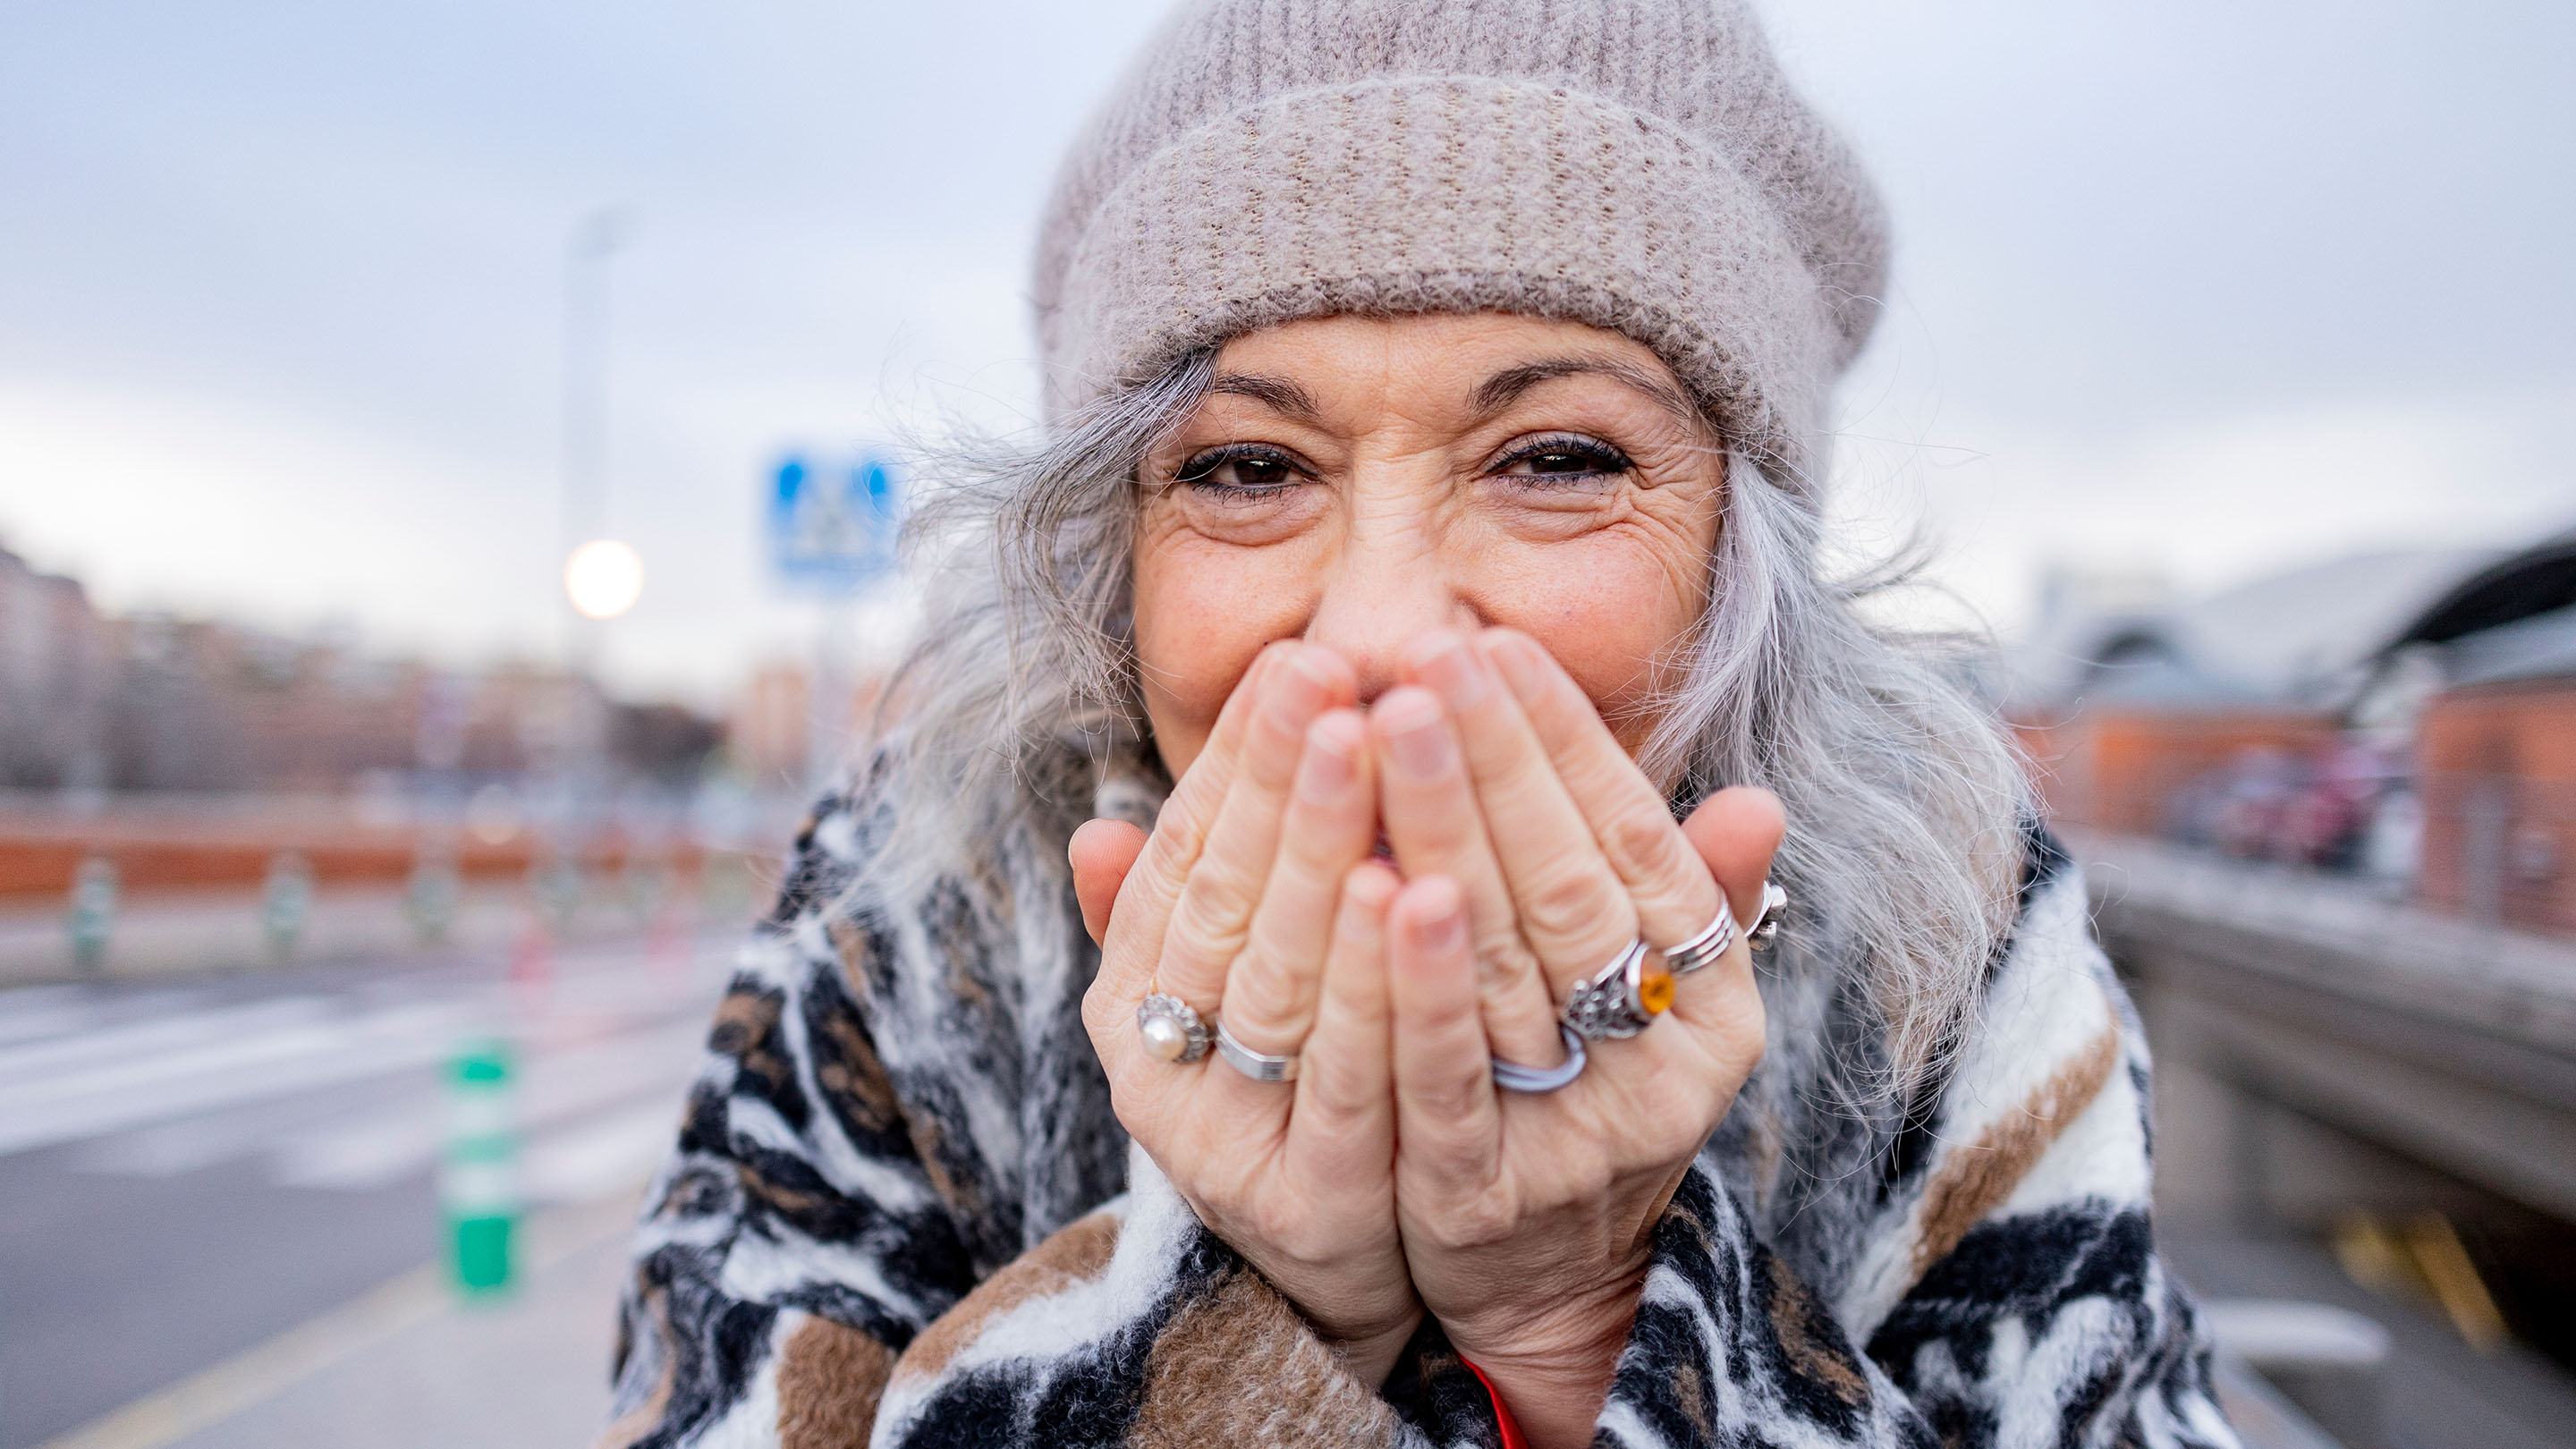 Person laughing and covering their mouth with their hands. They have several rings on their fingers.